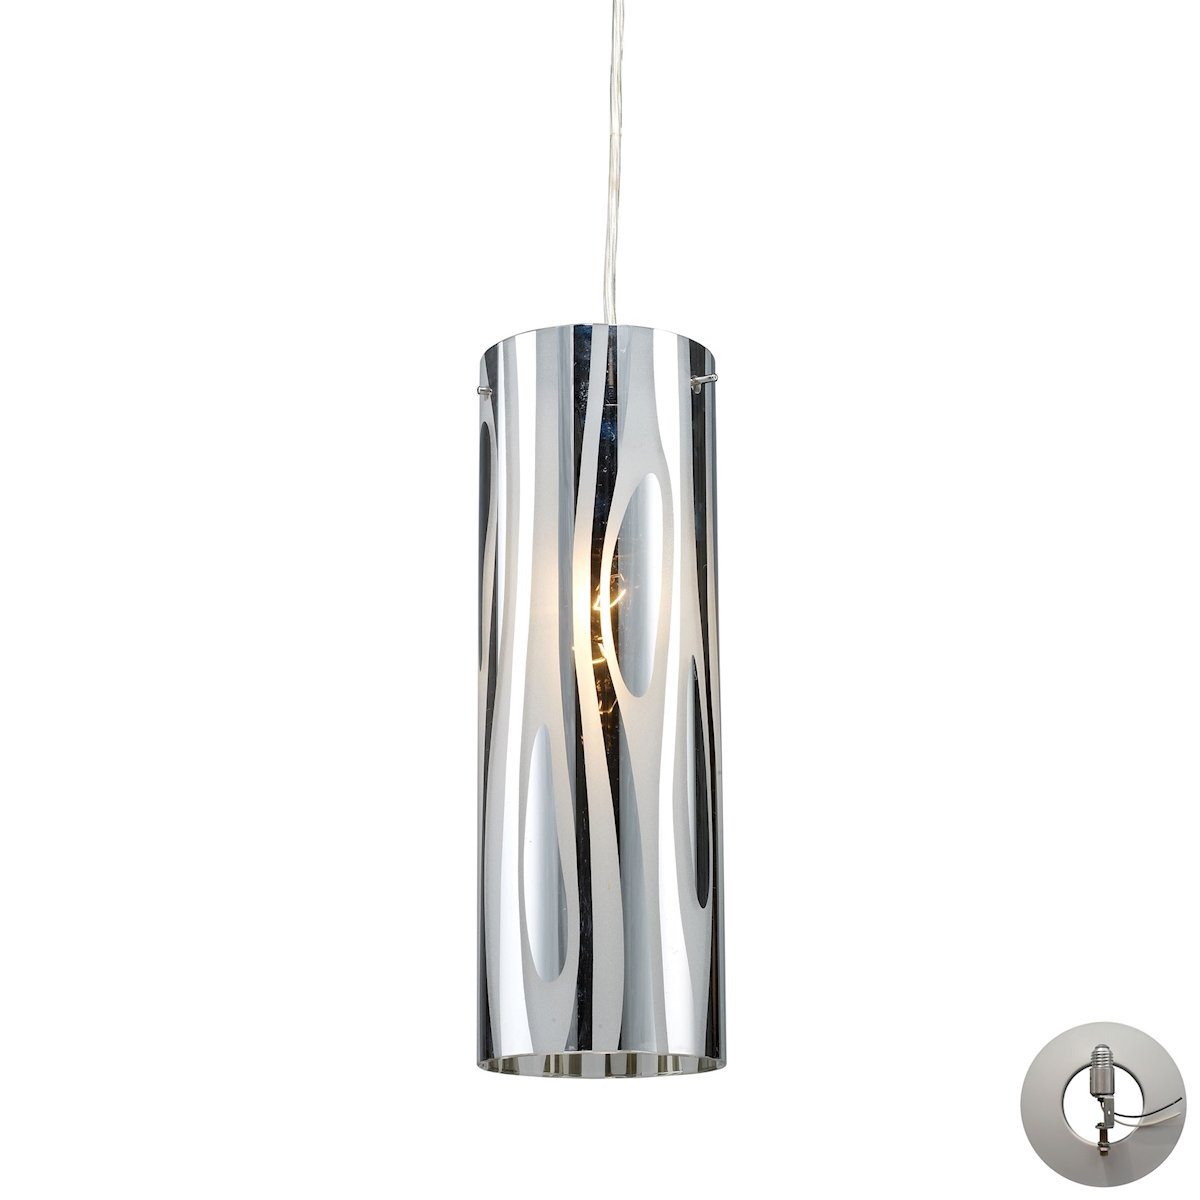 Chromia Pendant In Polished Chrome - Includes Recessed Lighting Kit Ceiling Elk Lighting 